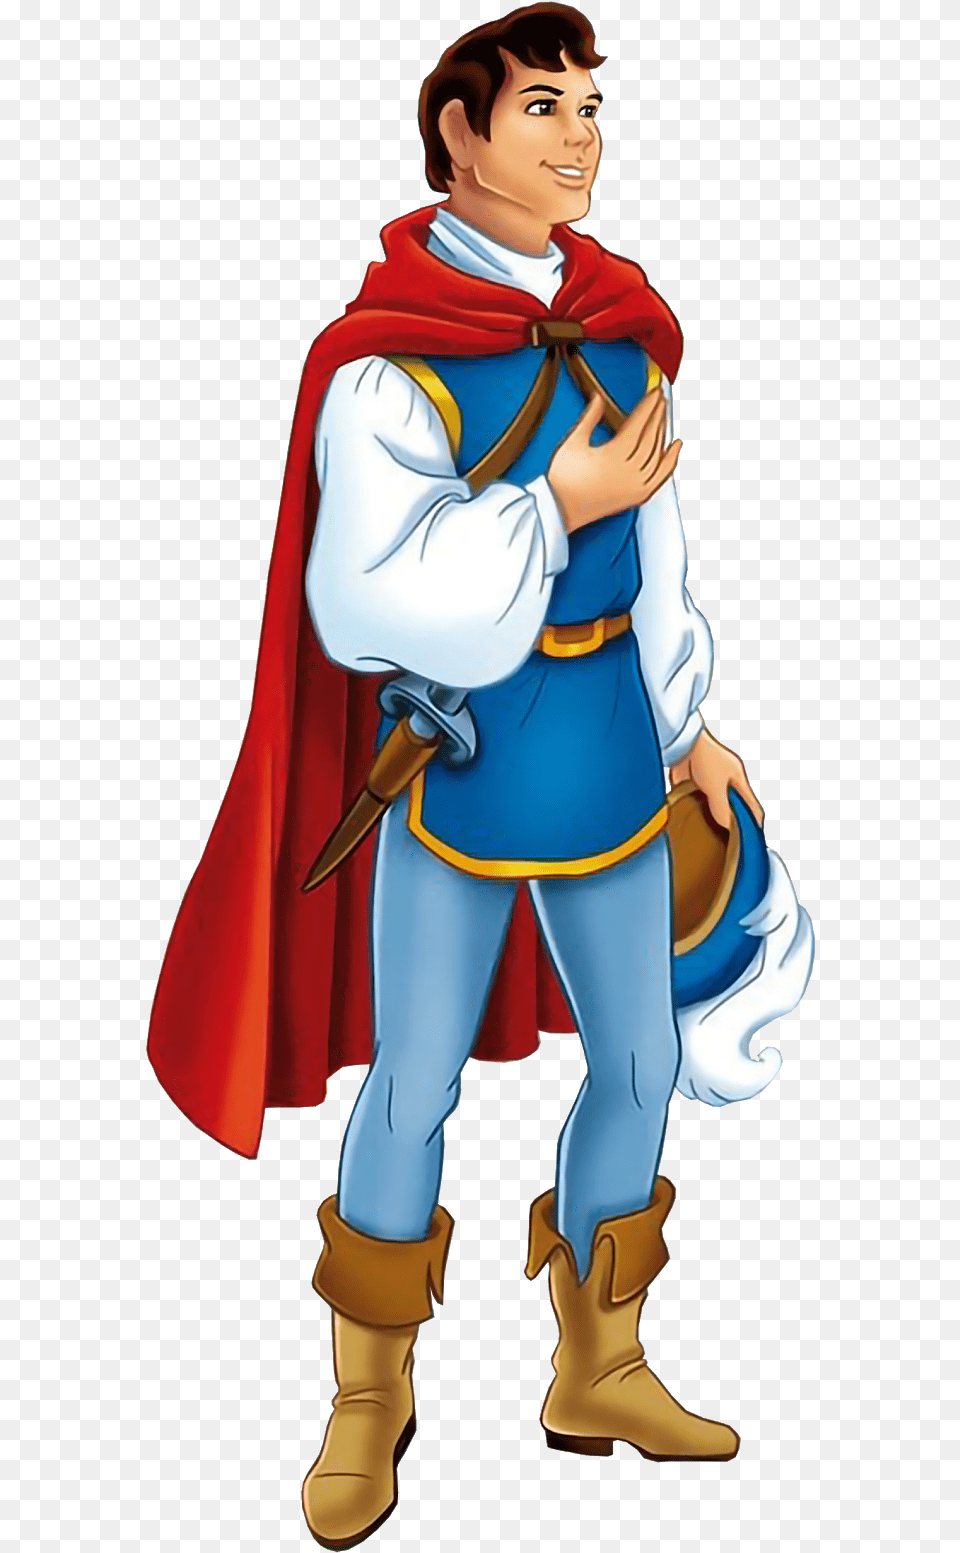 Snow White And Prince Charming Clipart Animal Crossing New Horizons Knight Outfit, Cape, Clothing, Adult, Person Free Transparent Png